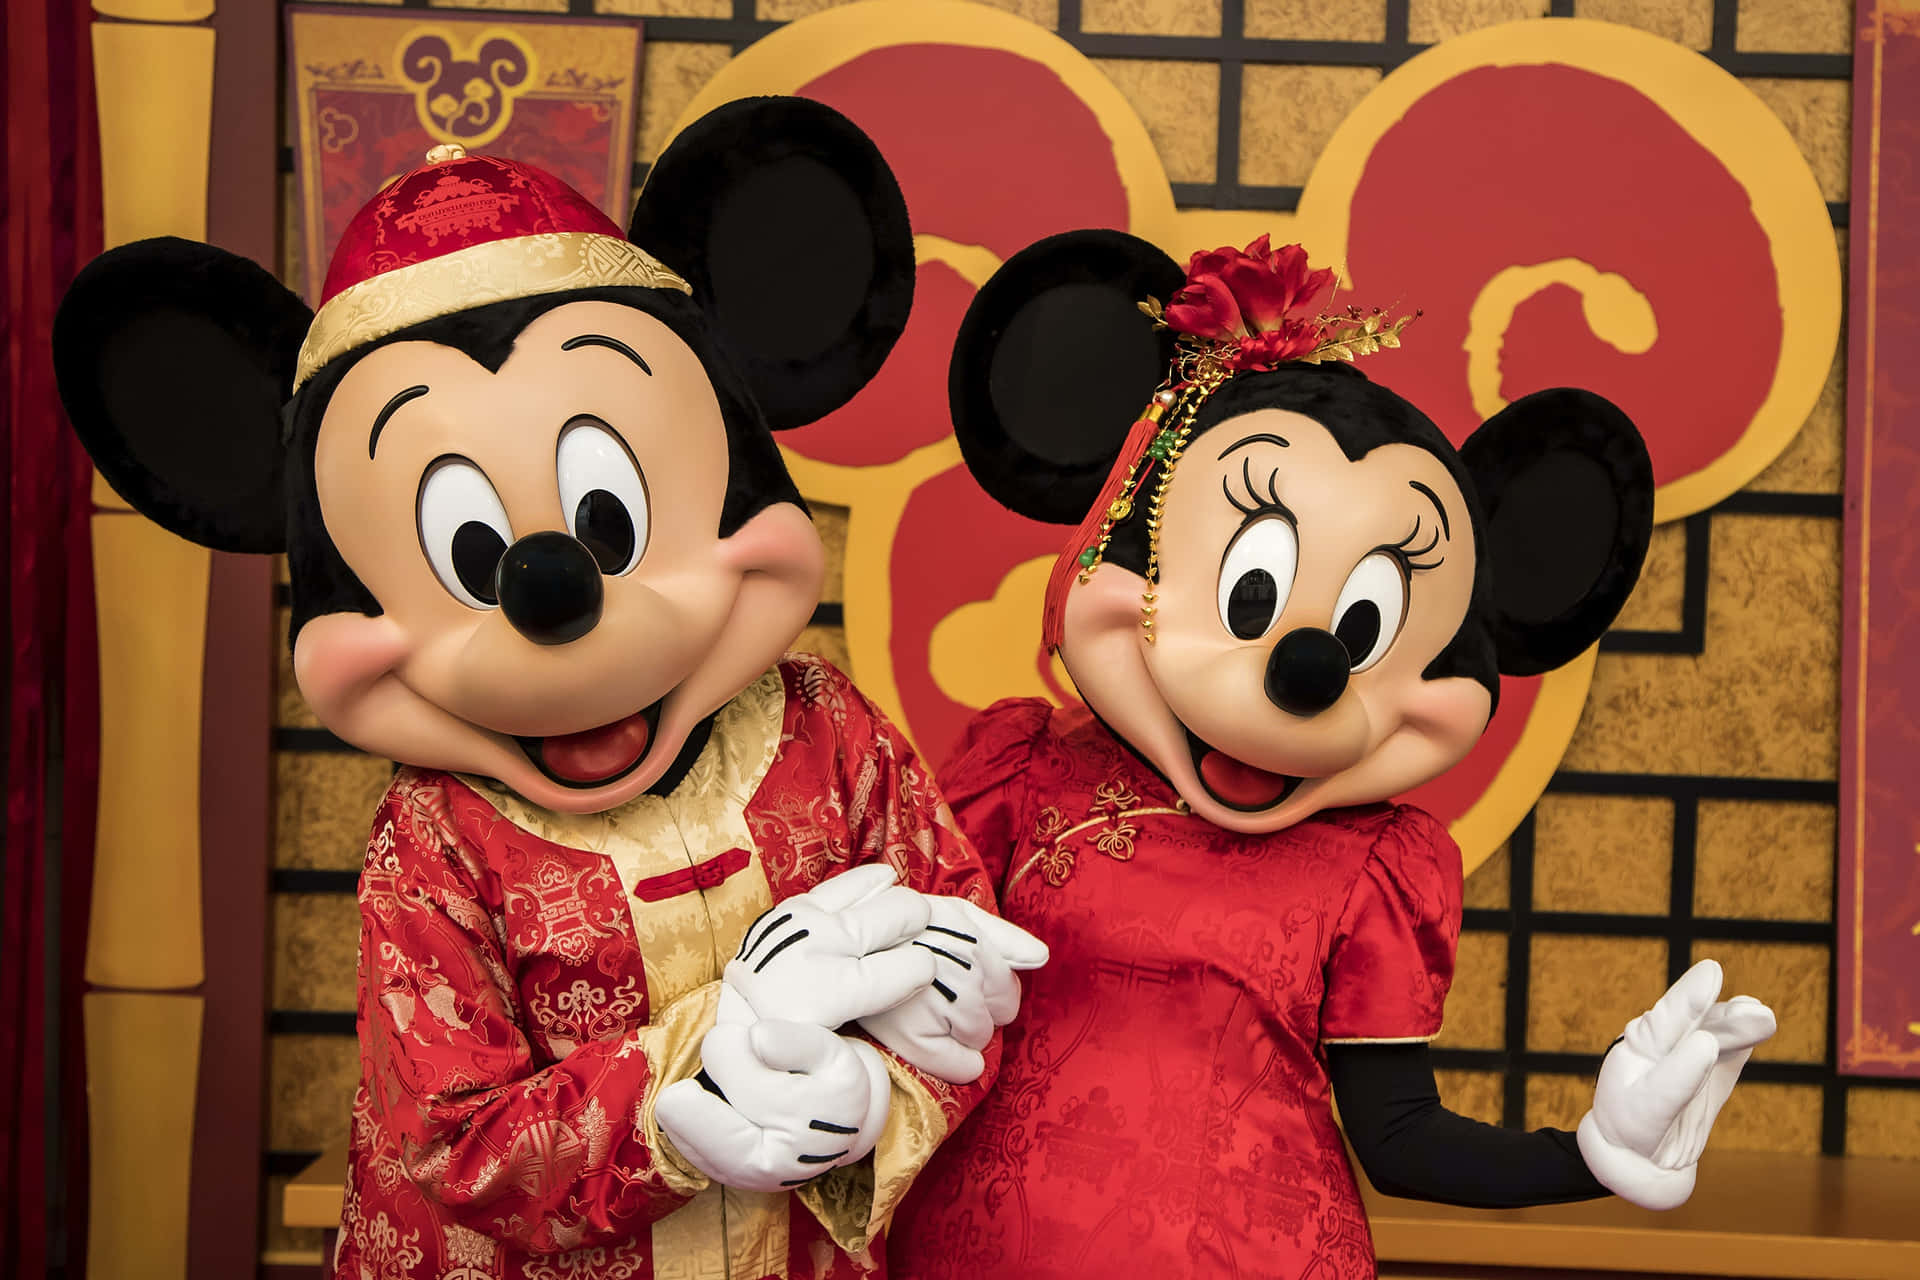 Welcome the New Year with a Smiling Mickey Mouse Wallpaper